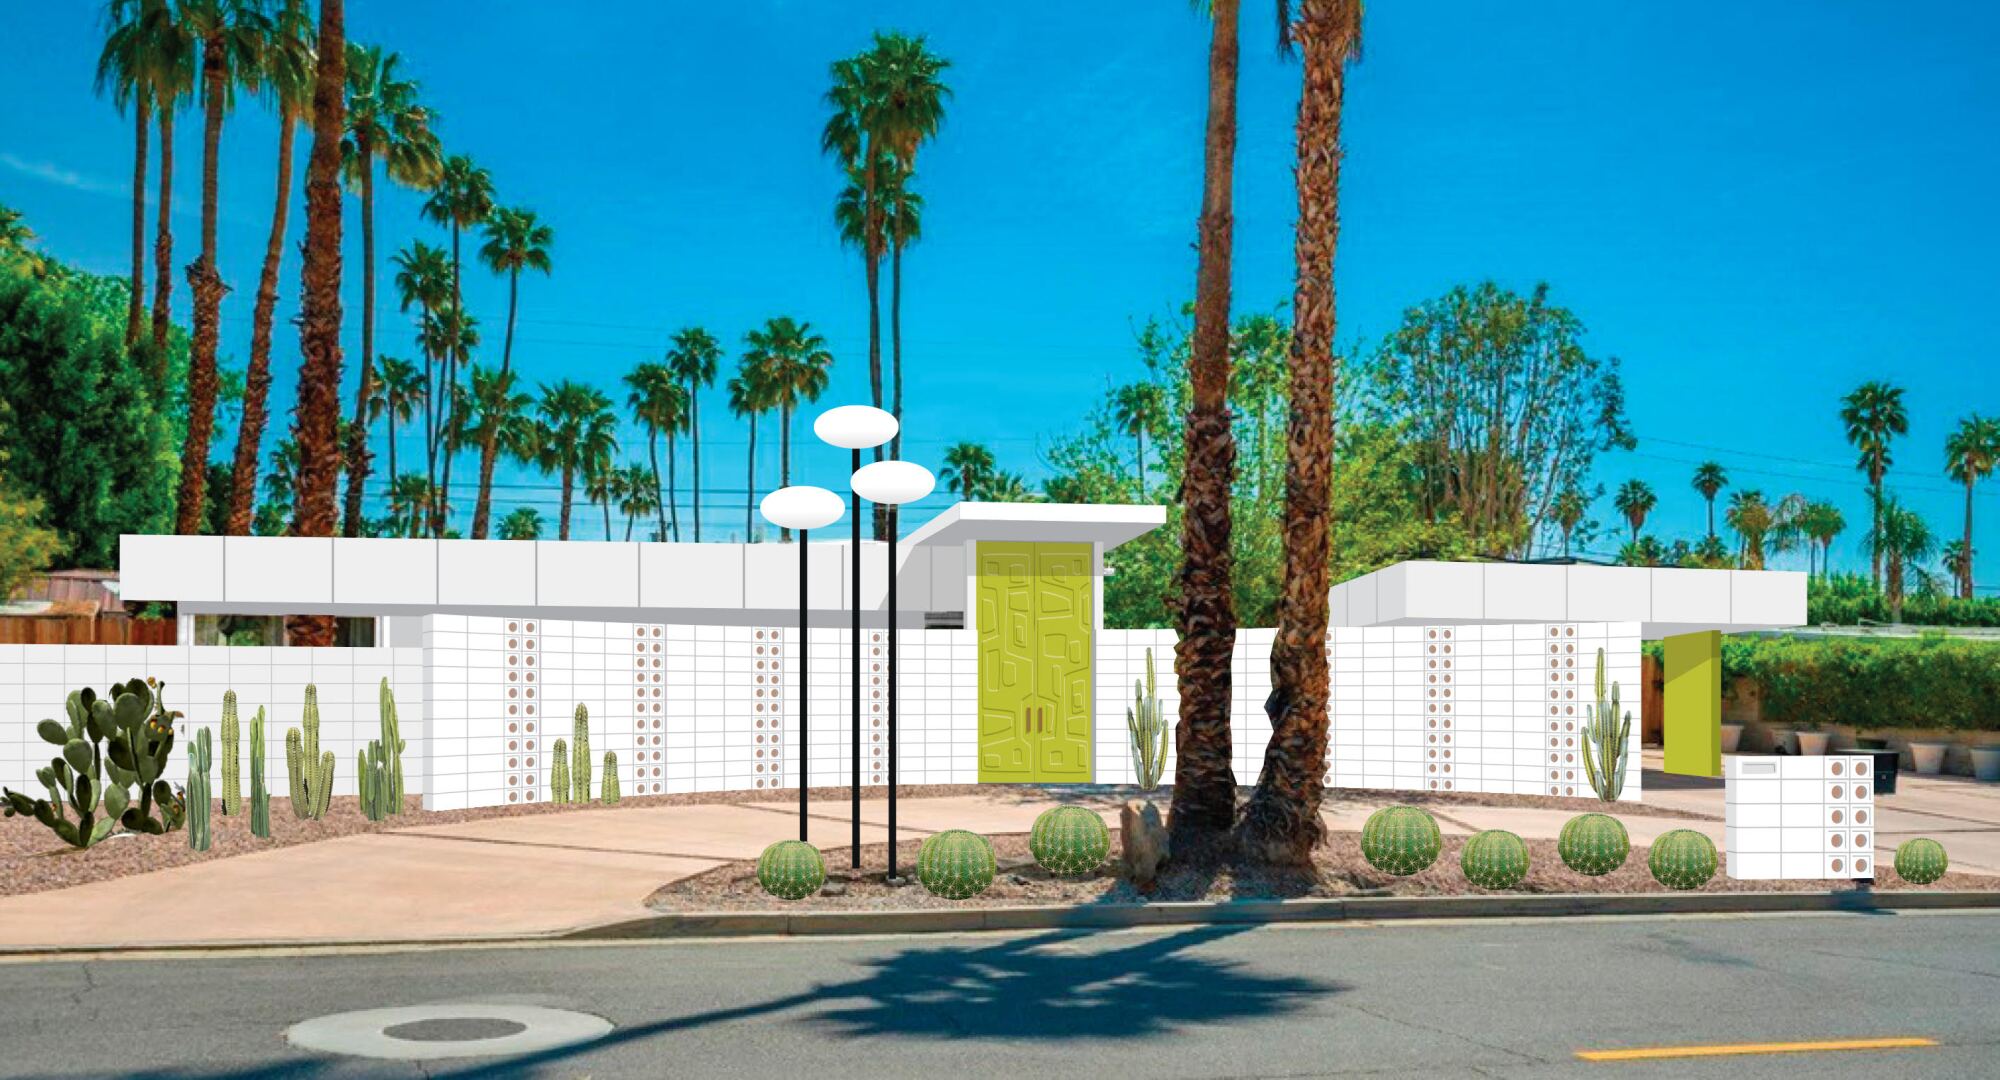 A rendering of a Midcentury modern house in Palm Springs.